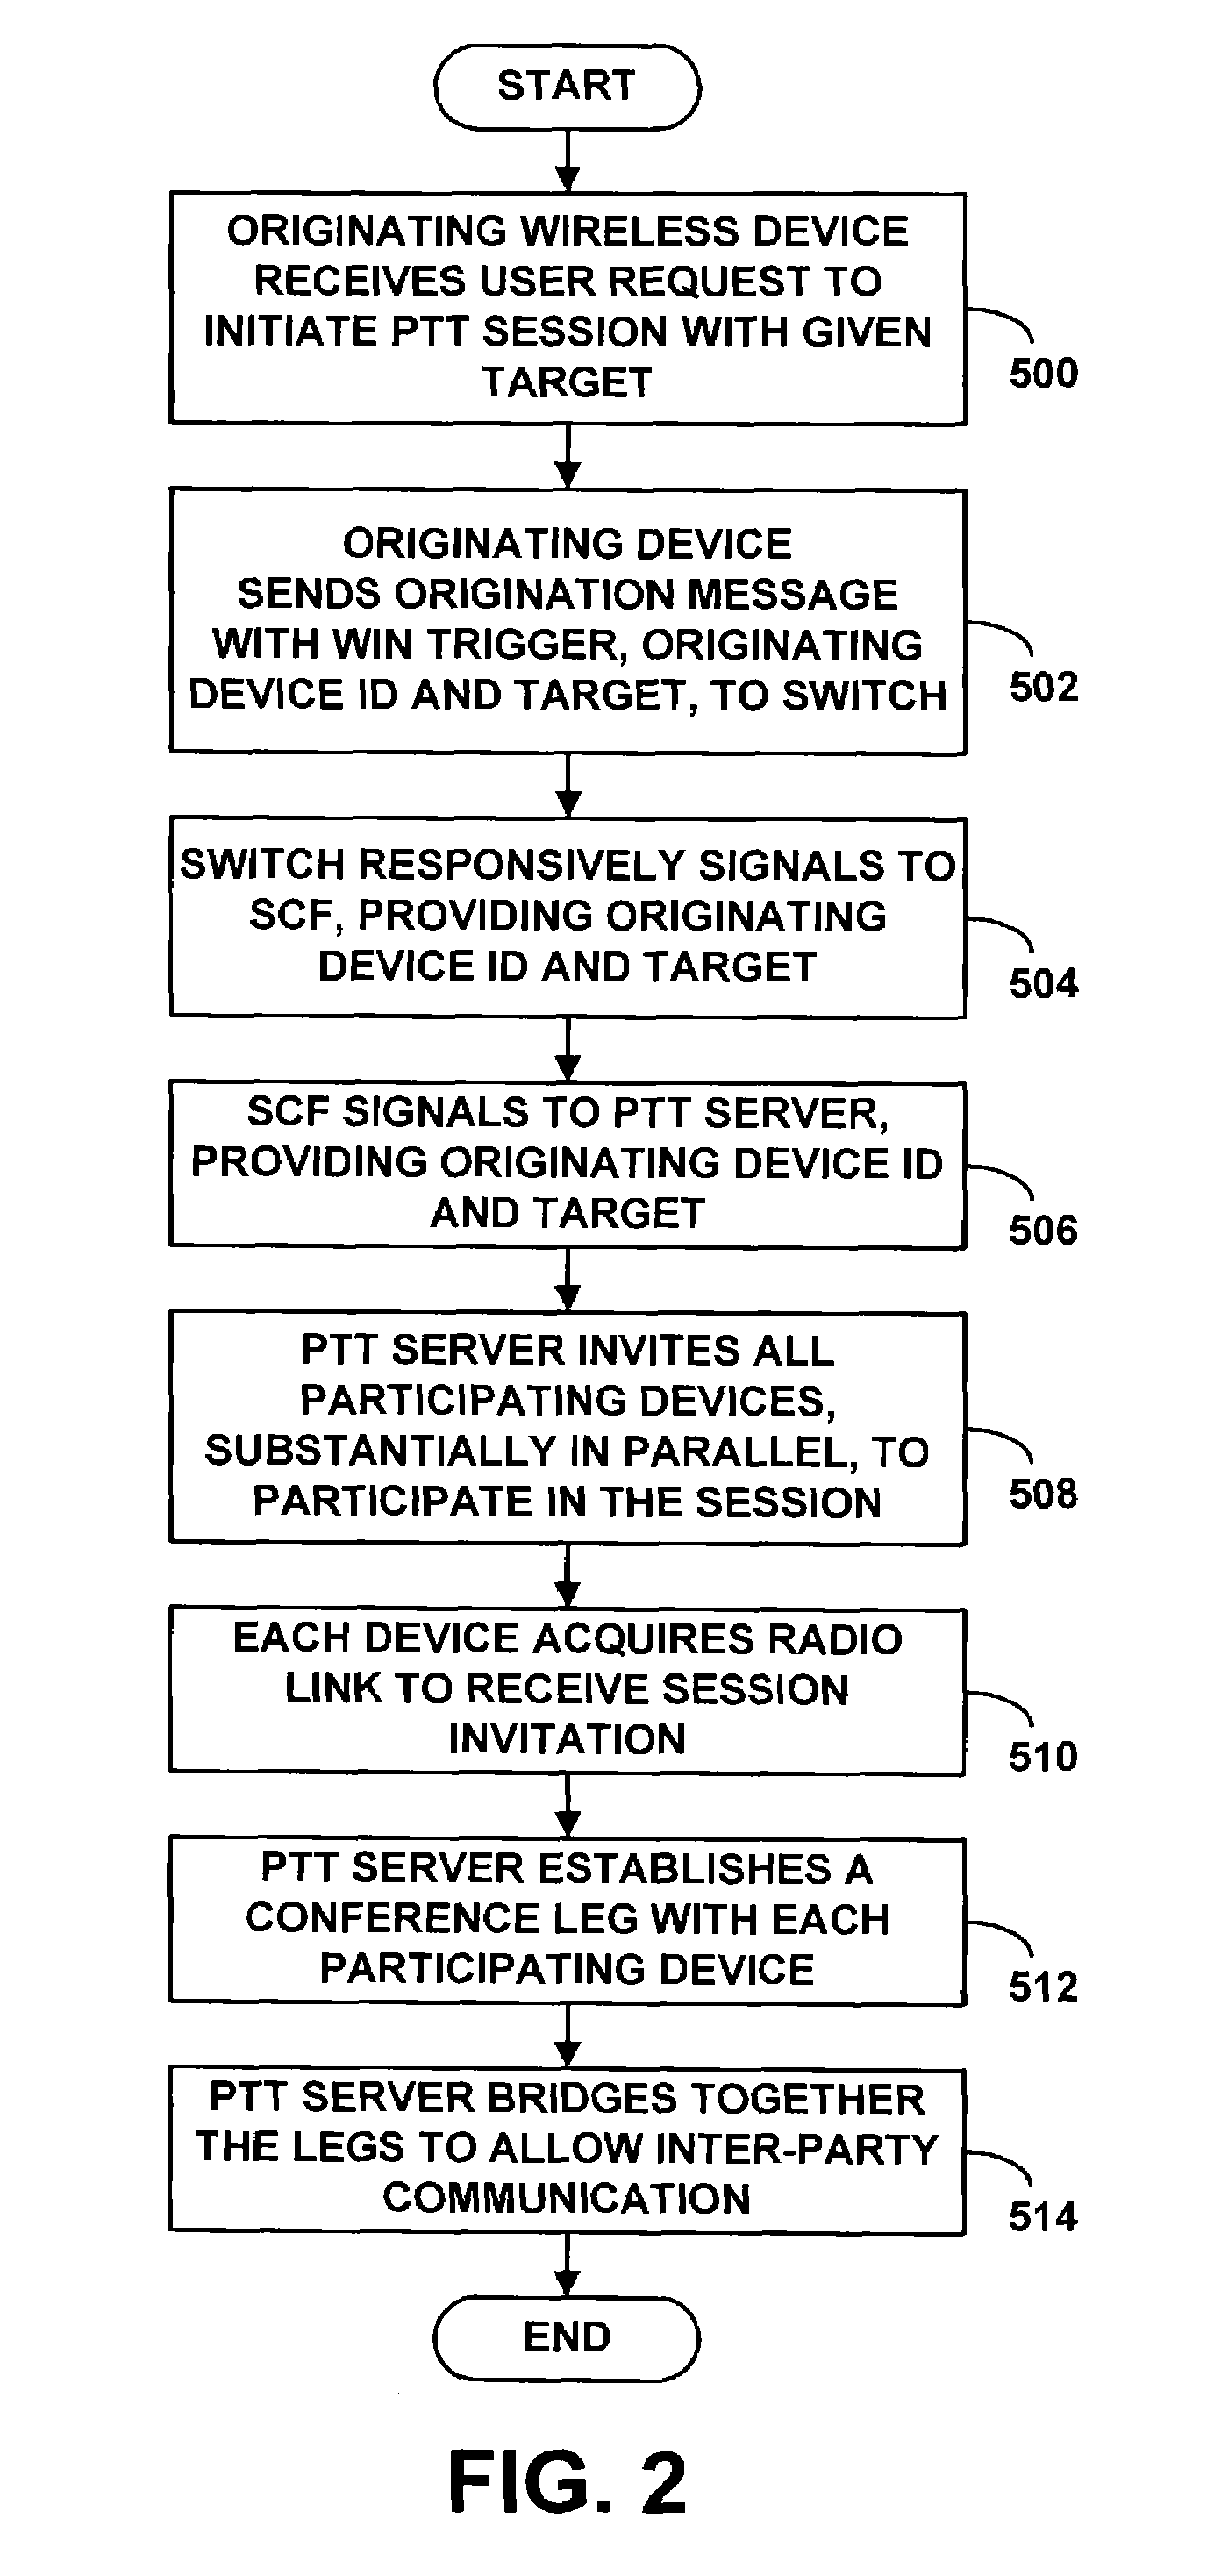 Method and system for use of intelligent network processing to prematurely wake up a terminating mobile station